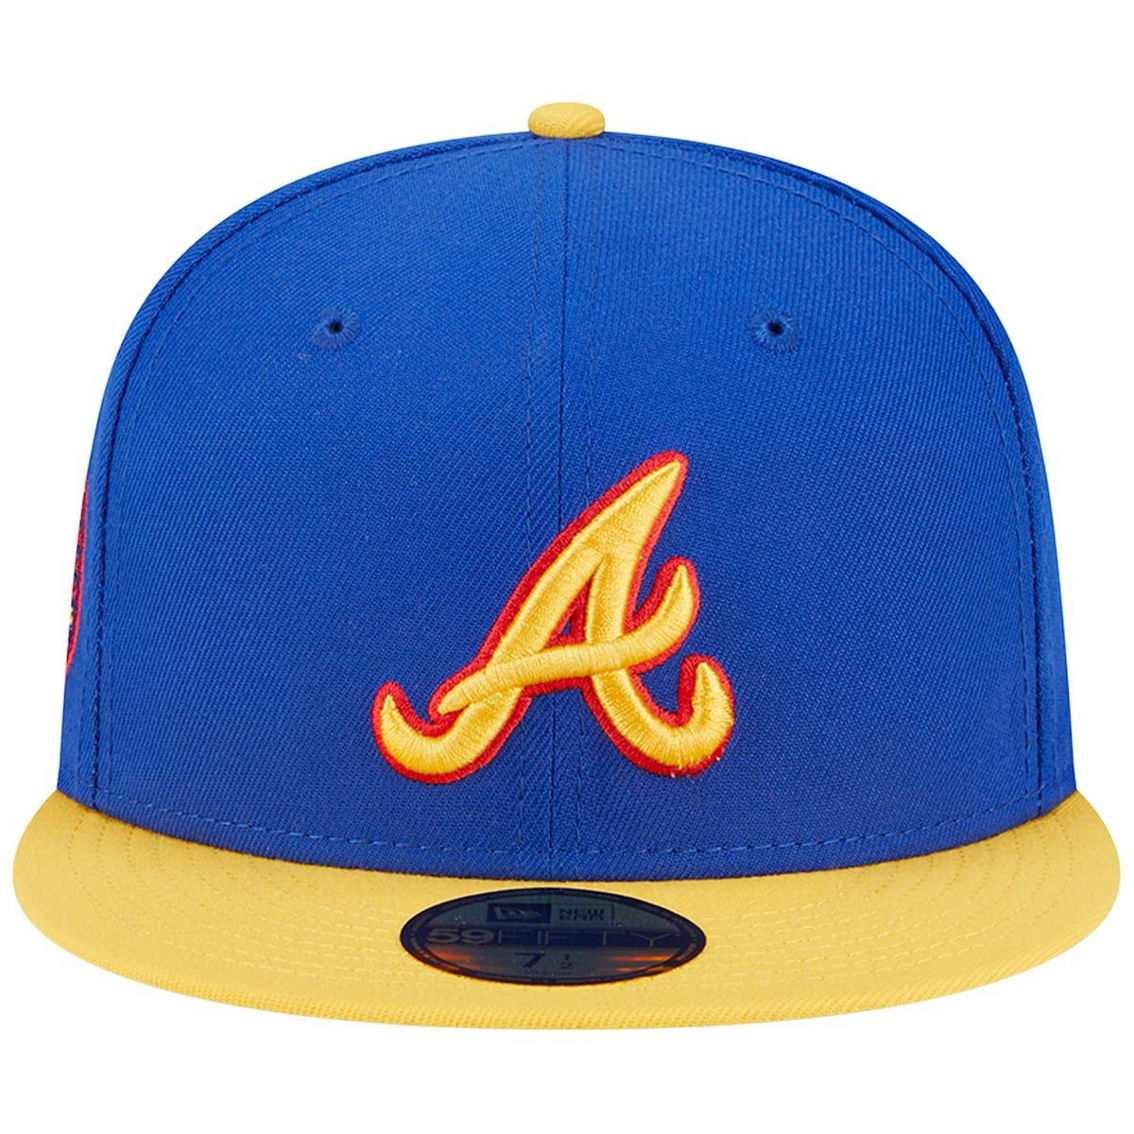 New Era Men's Royal/Yellow Atlanta Braves Empire 59FIFTY Fitted Hat - Image 3 of 4